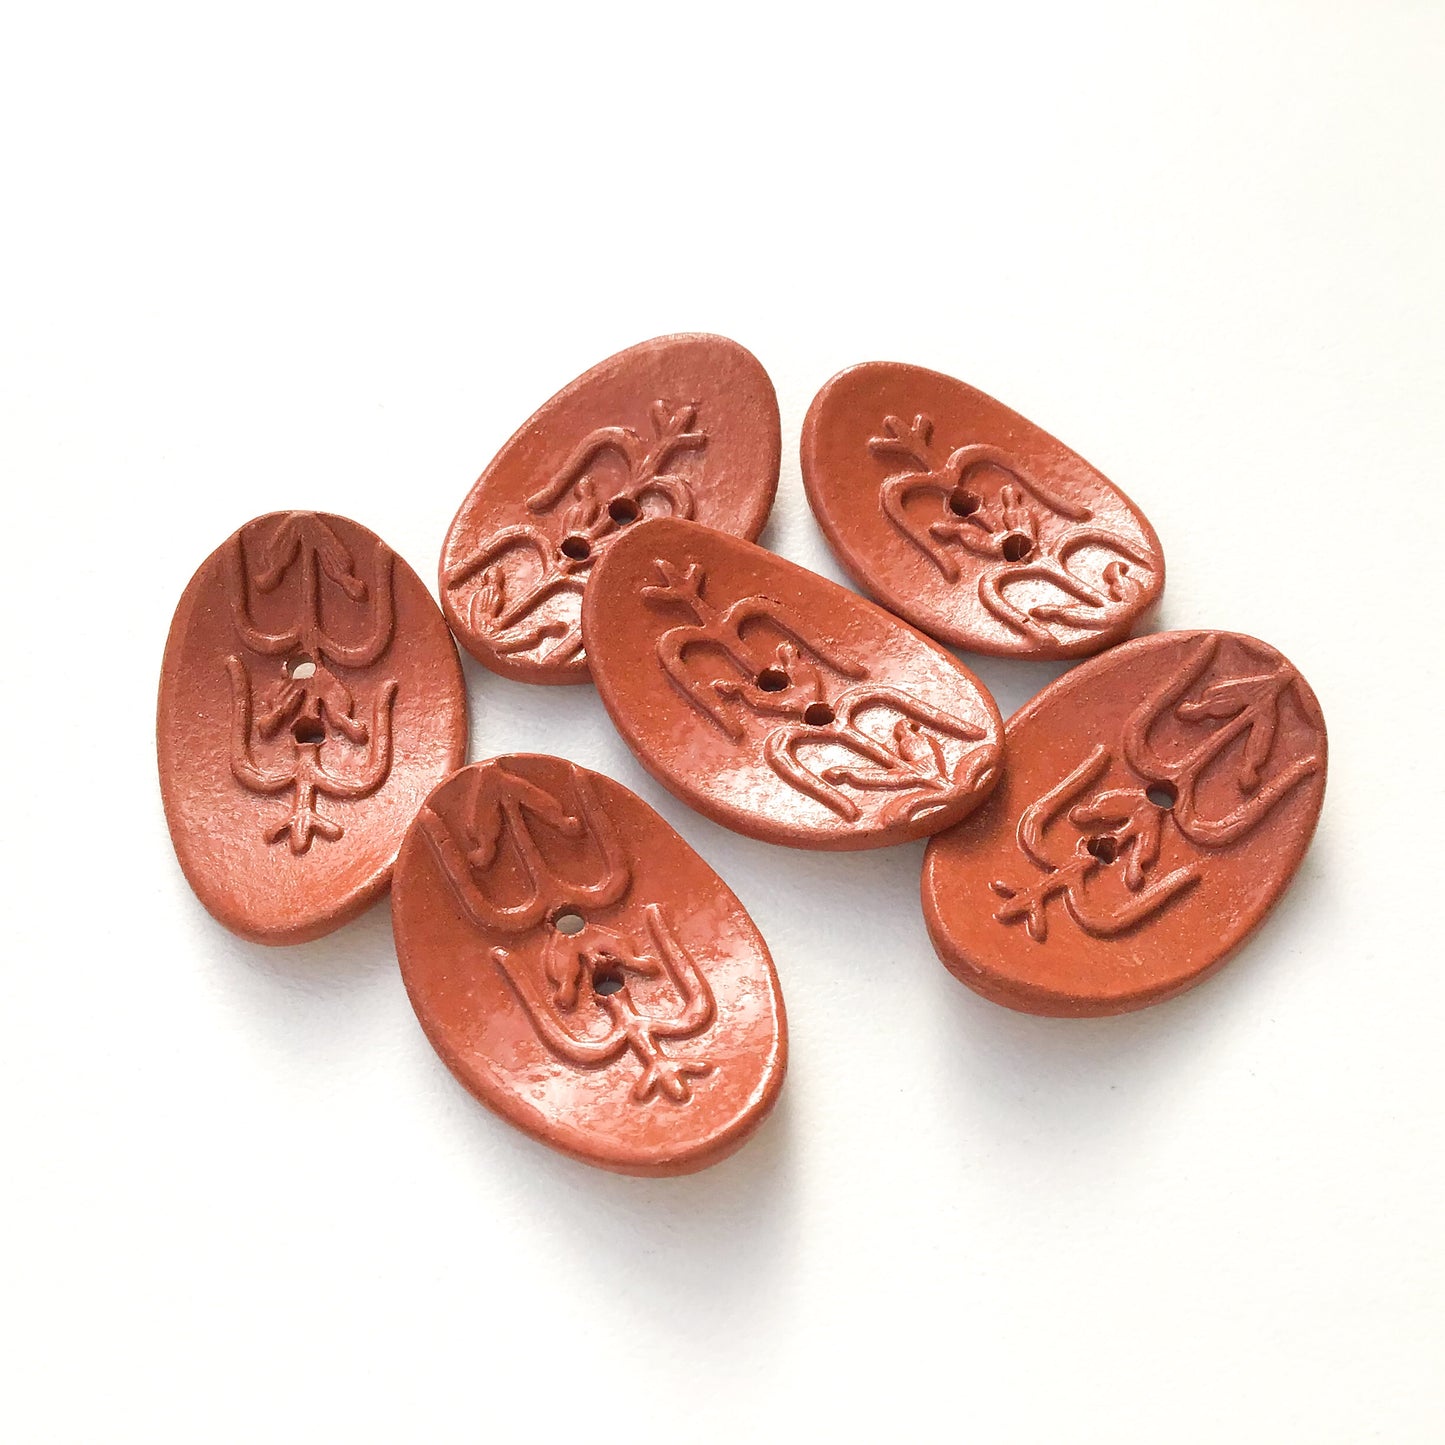 Southwestern Corn Buttons - Reddish-Brown Ceramic Buttons - 3/4" x 1 1/16" - 6 Pack